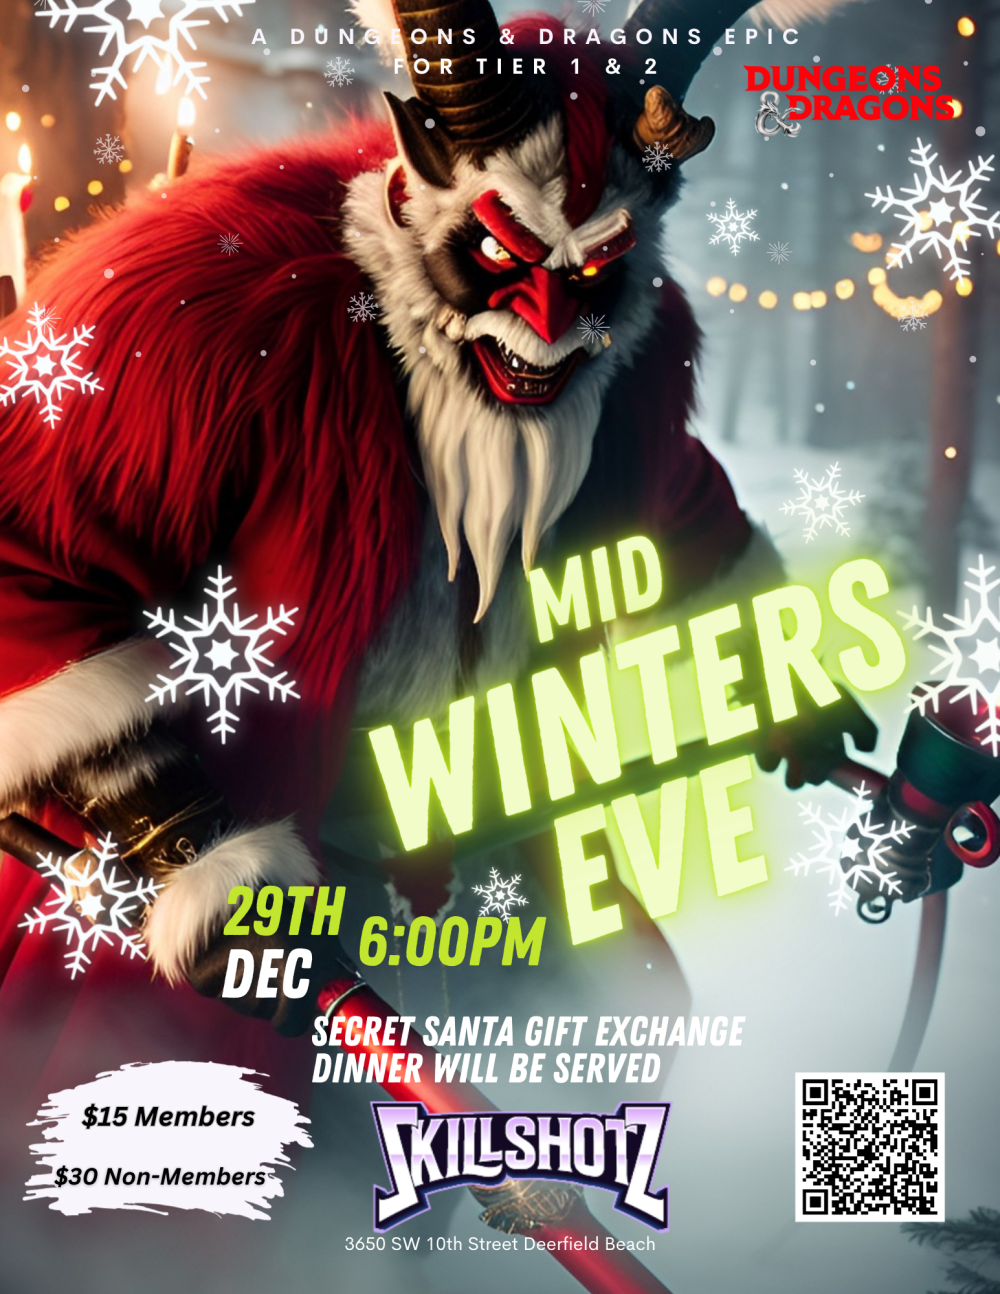 EPIC: Mid Winters Eve A Special EPIC Event for Tier 1 & 2 on Dec 29, 18:00@SkillShotz - Buy tickets and Get information on SkillShotzGaming skillshotzgaming.com